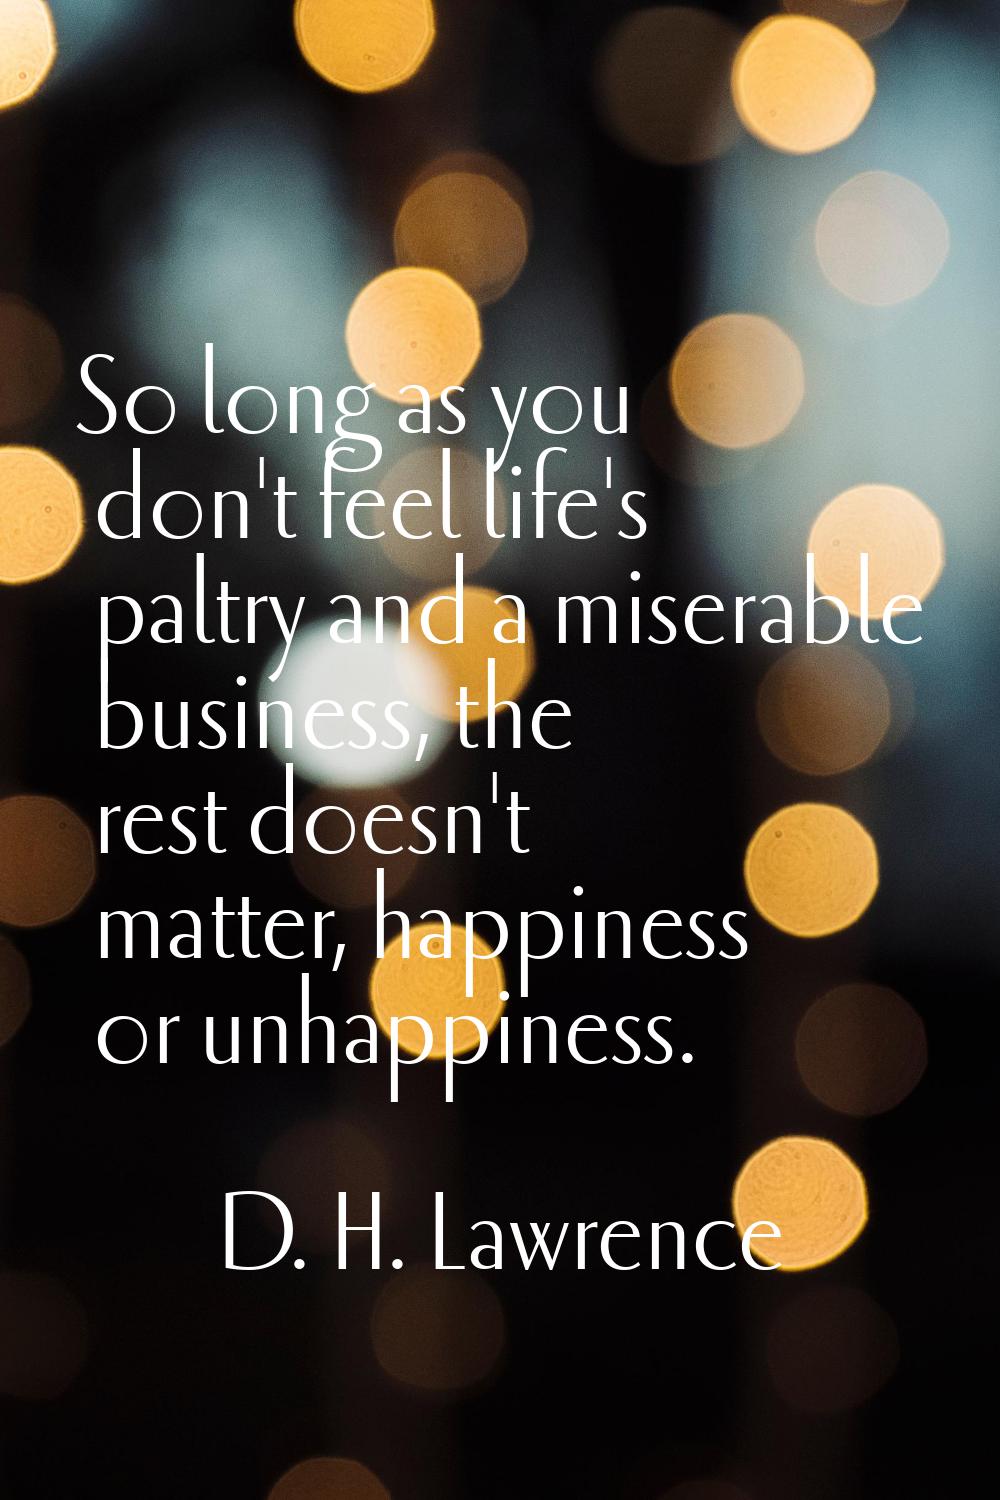 So long as you don't feel life's paltry and a miserable business, the rest doesn't matter, happines